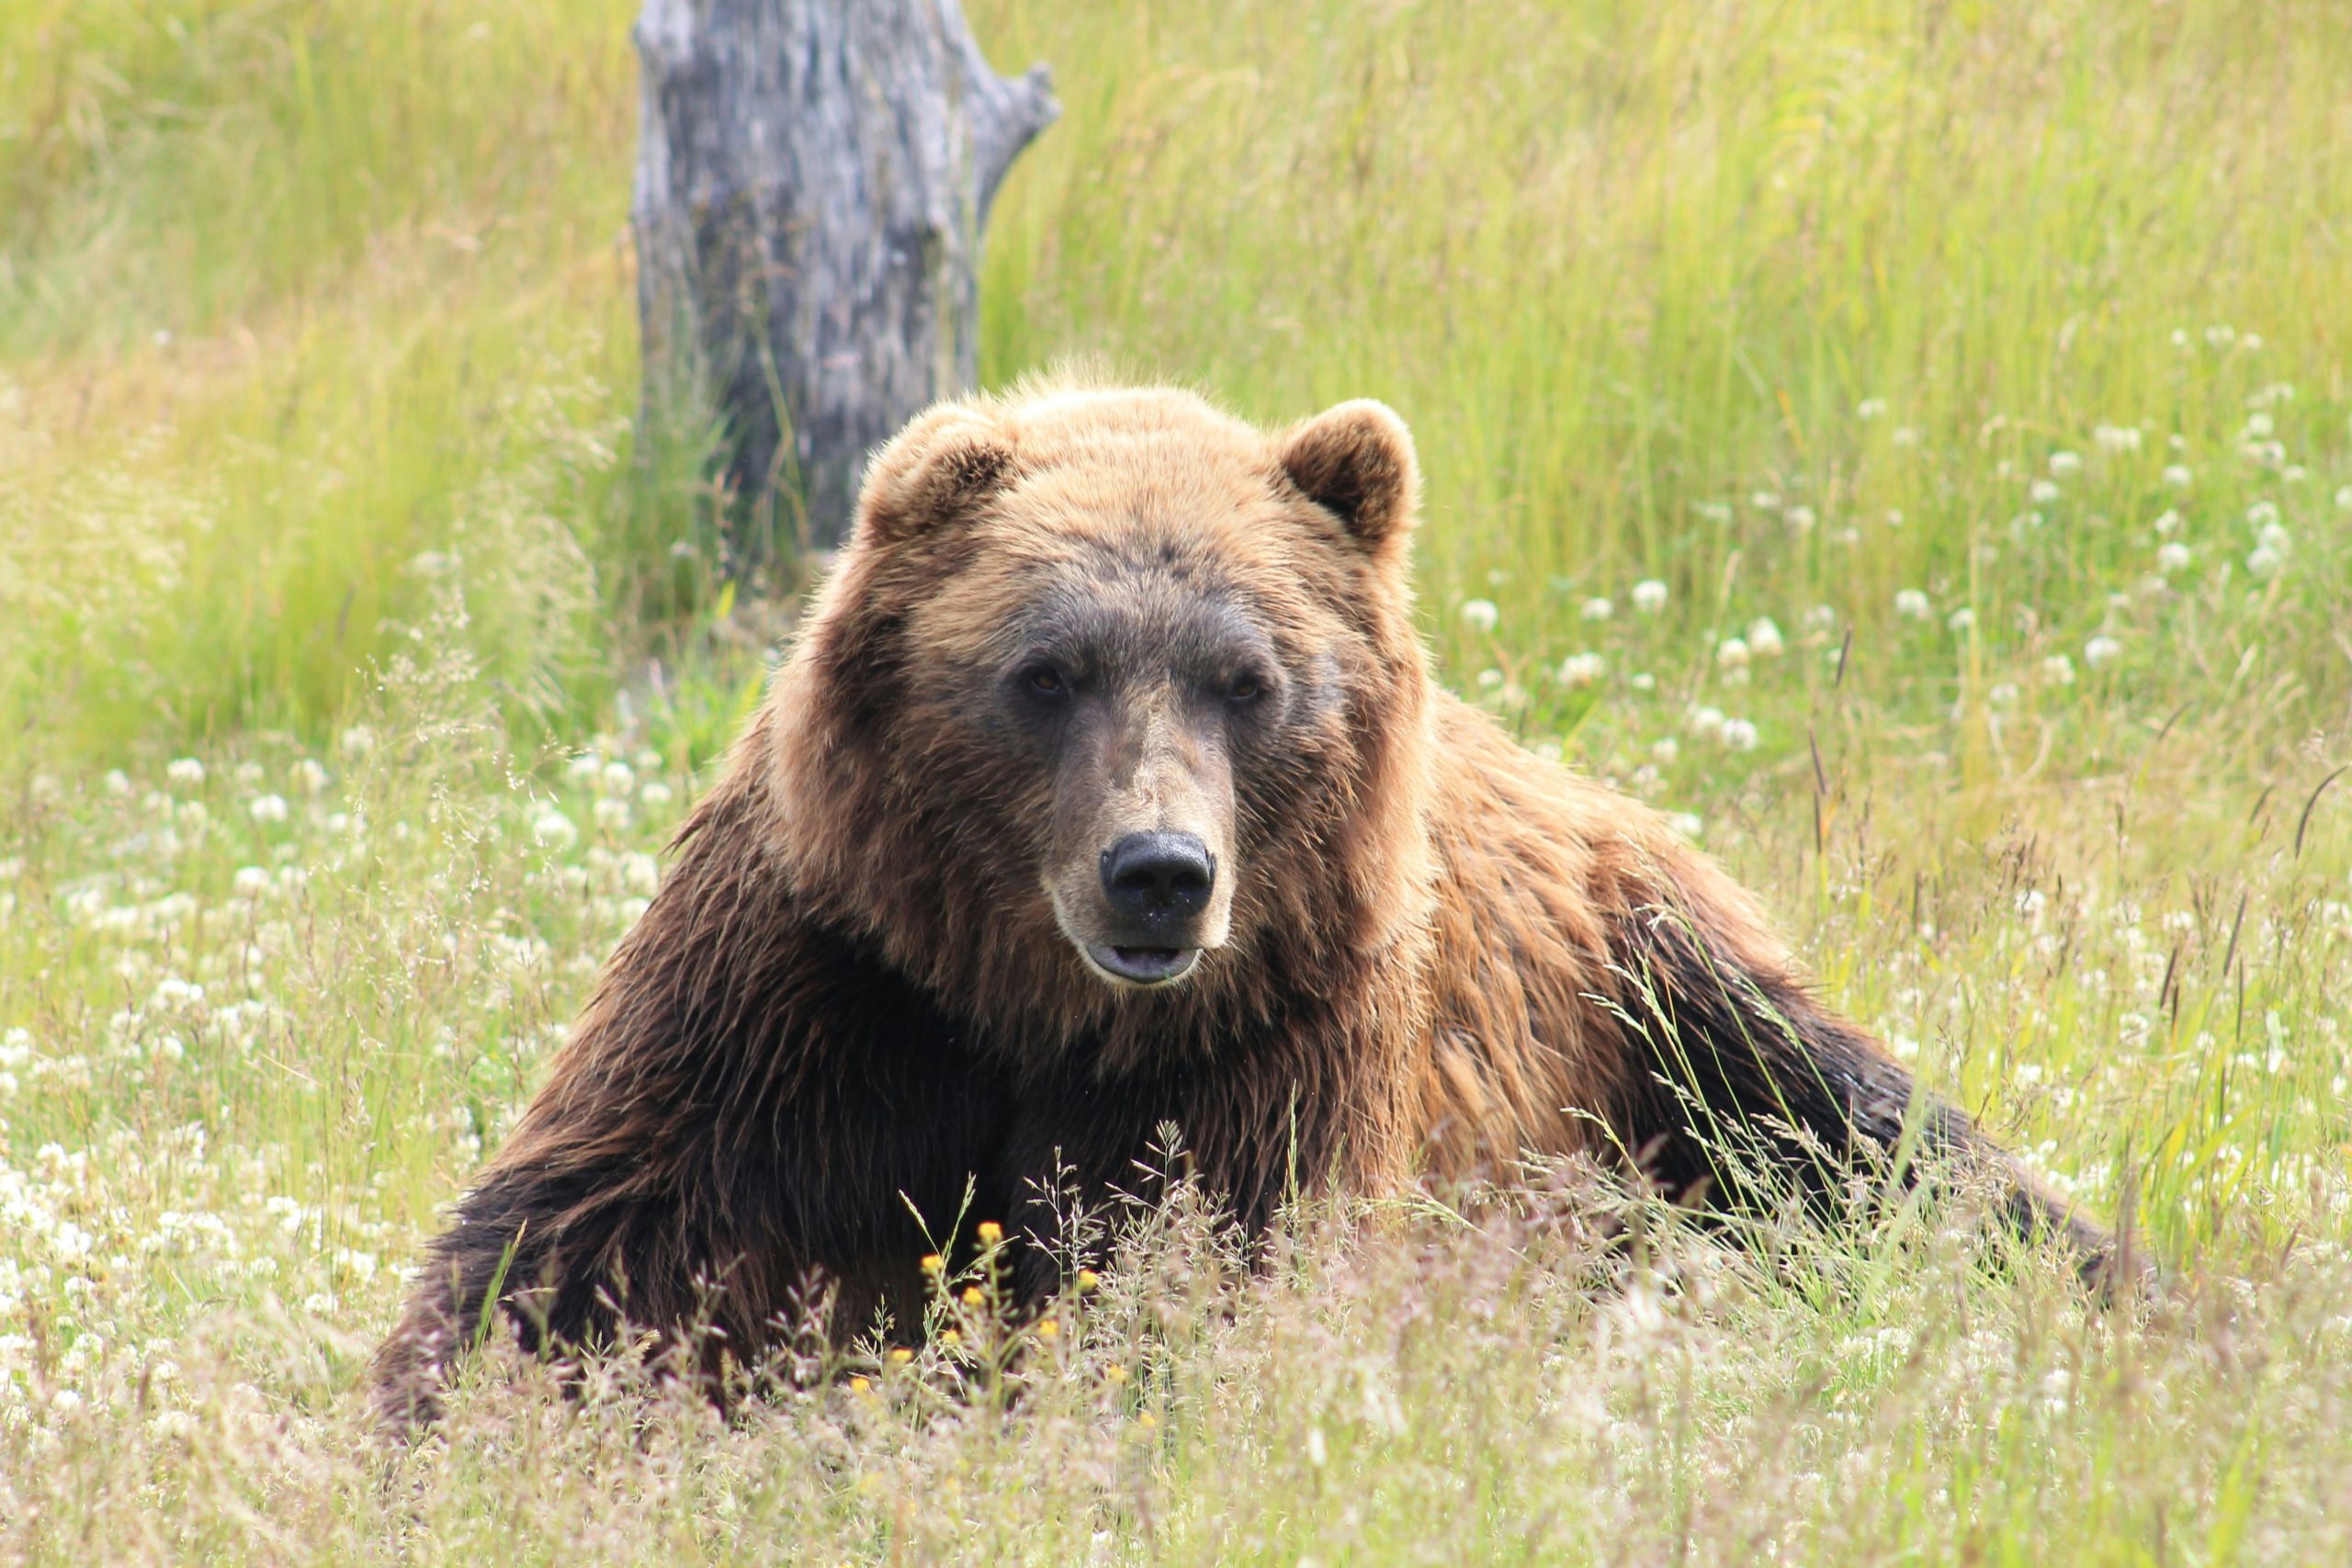 prepare for the unexpected with our guide on handling a bear encounter. learn how to stay safe and react appropriately in bear country.